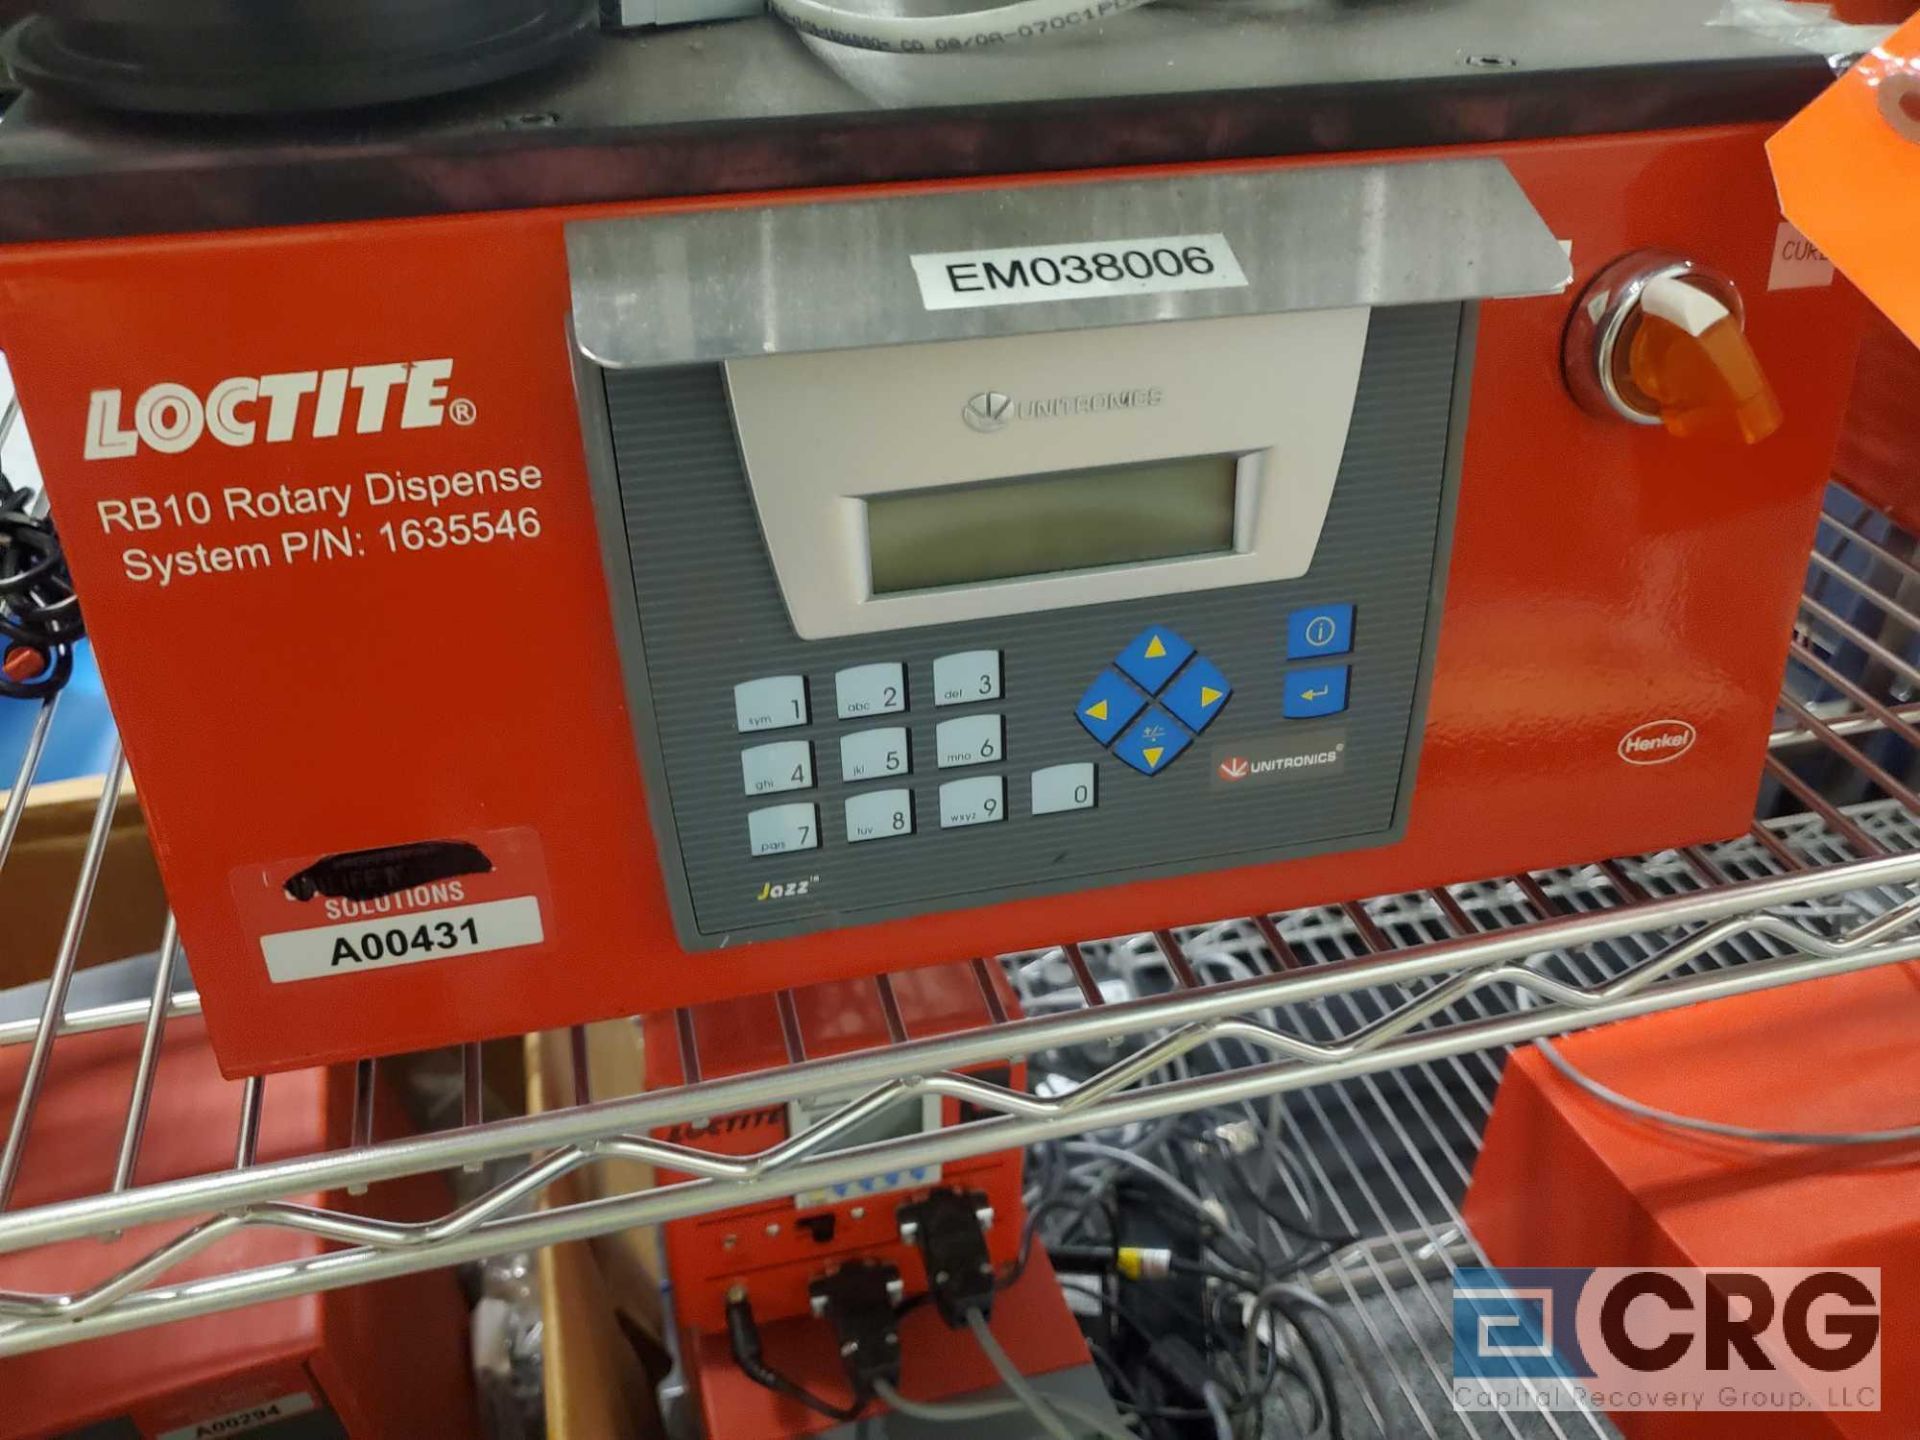 Loctite RB10 rotary dispense system - Image 2 of 2